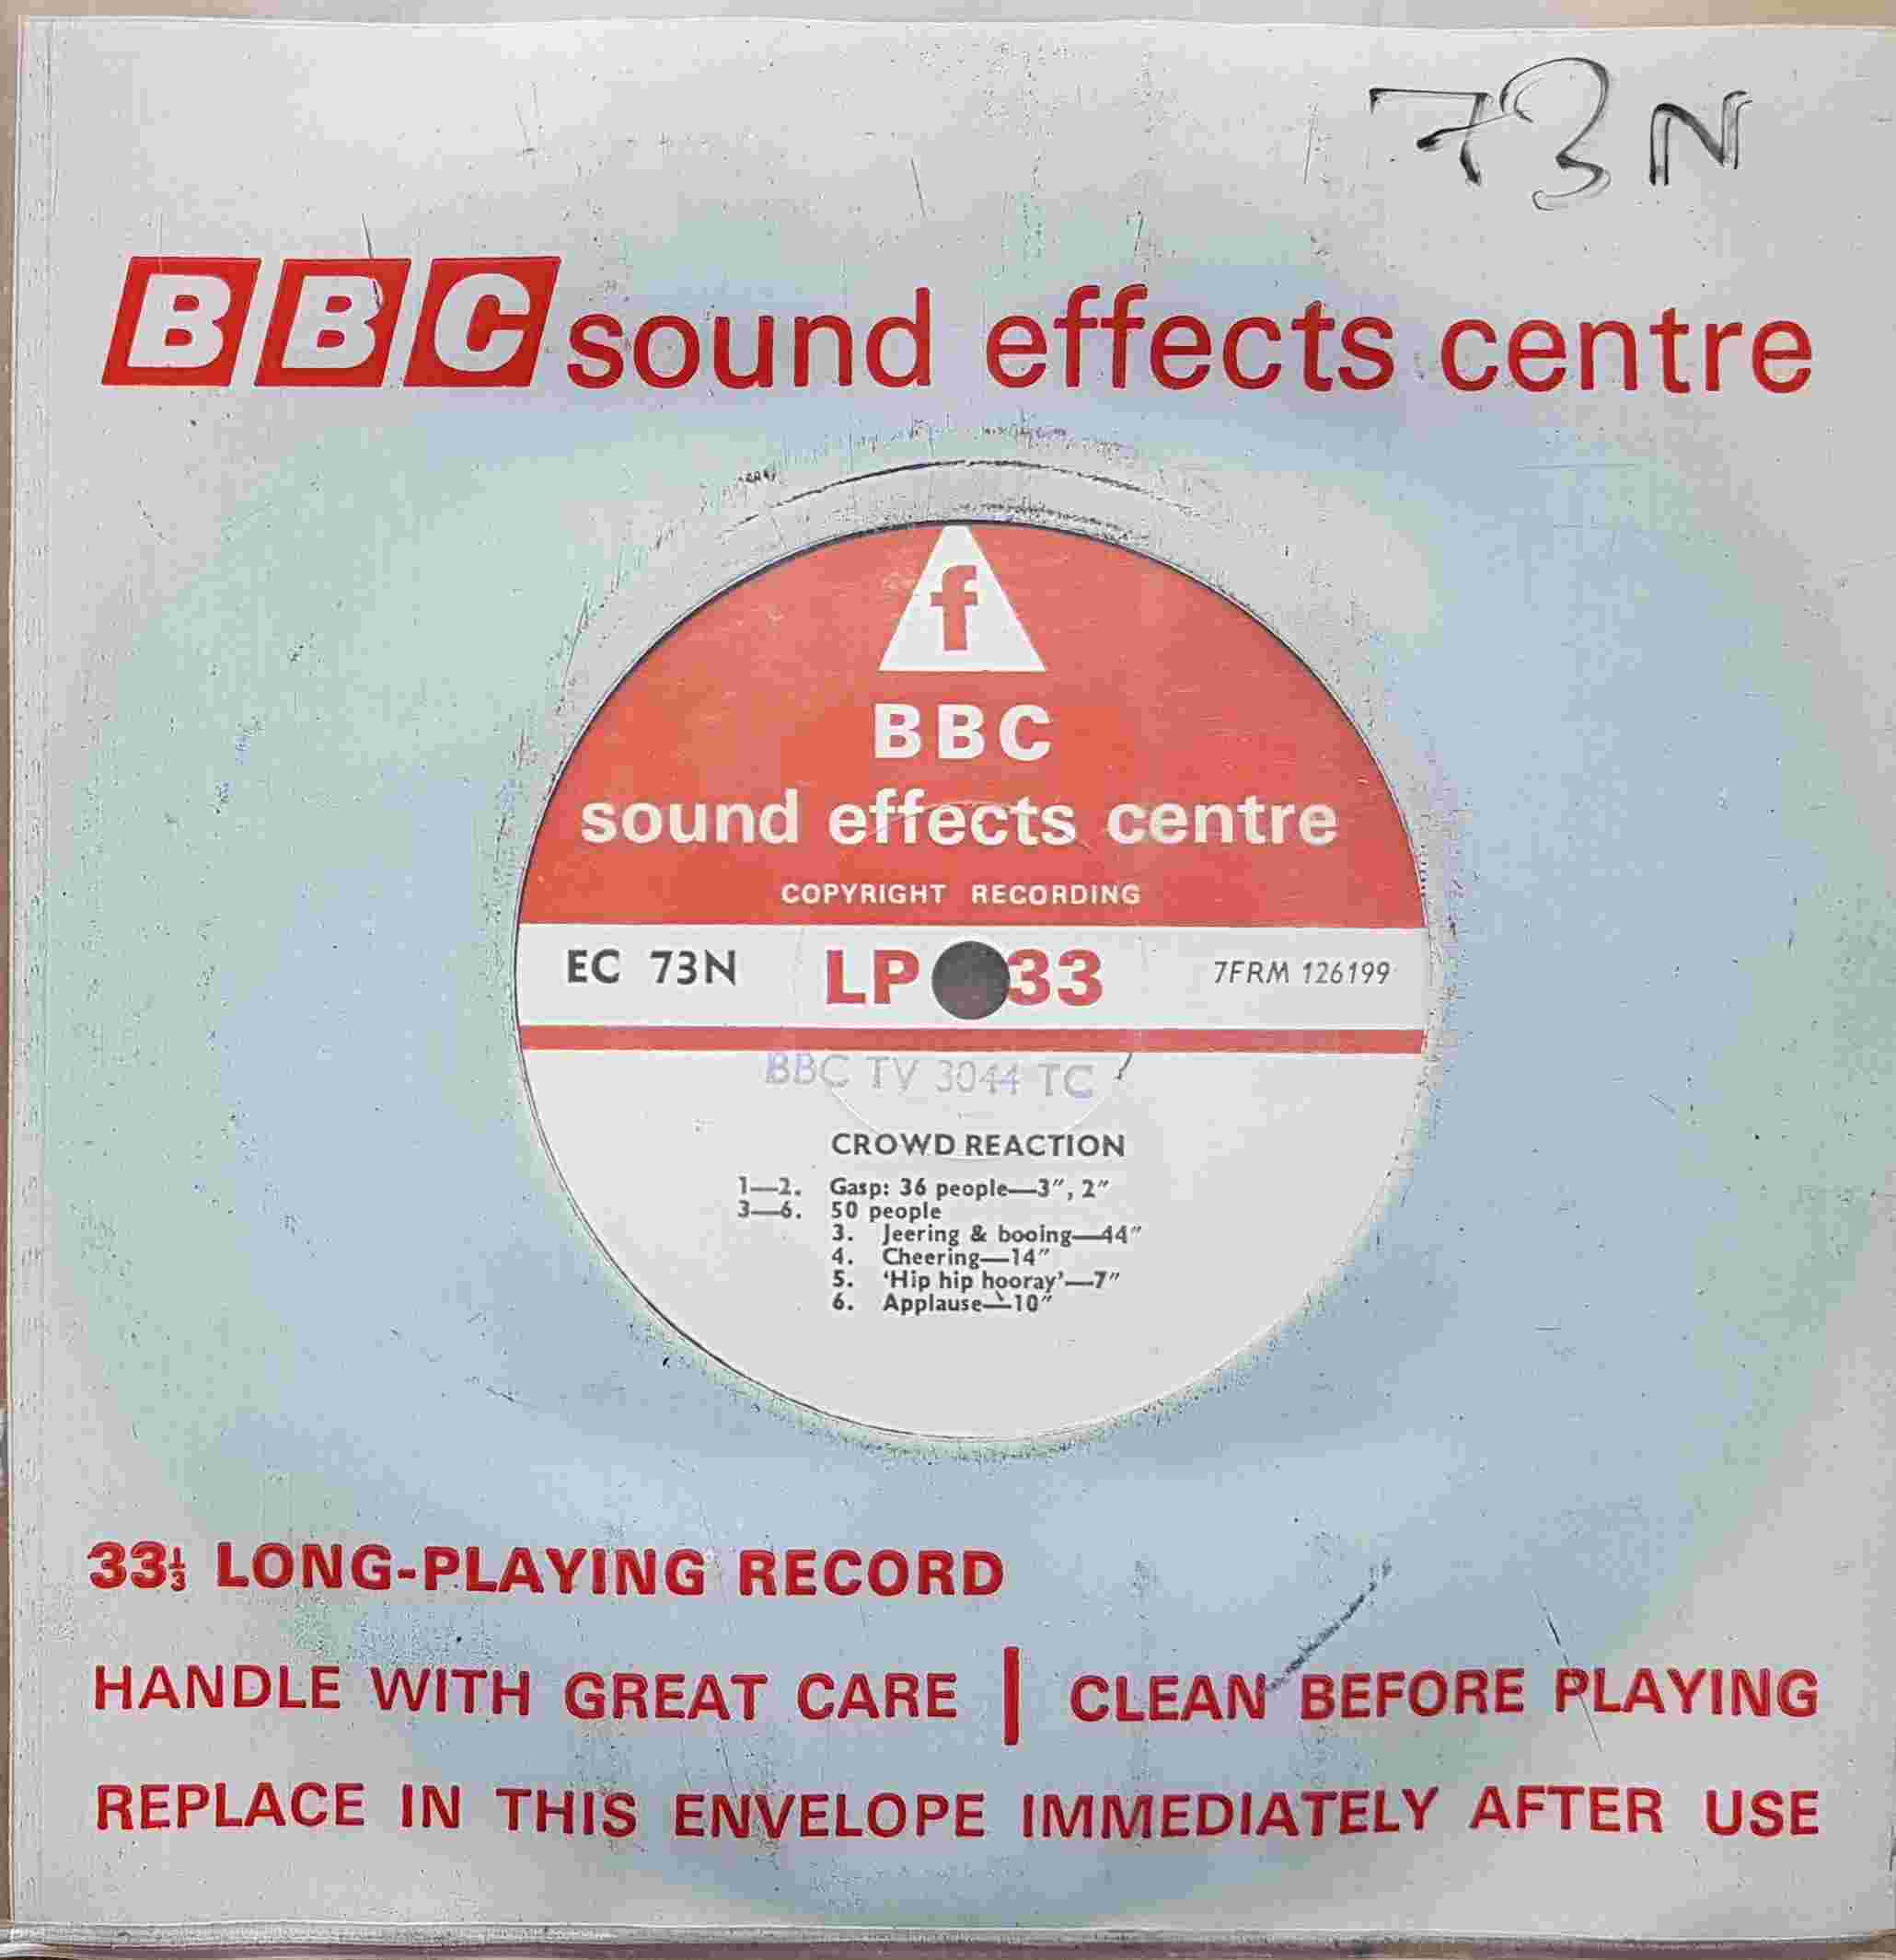 Picture of EC 73N Crowd reaction by artist Not registered from the BBC singles - Records and Tapes library